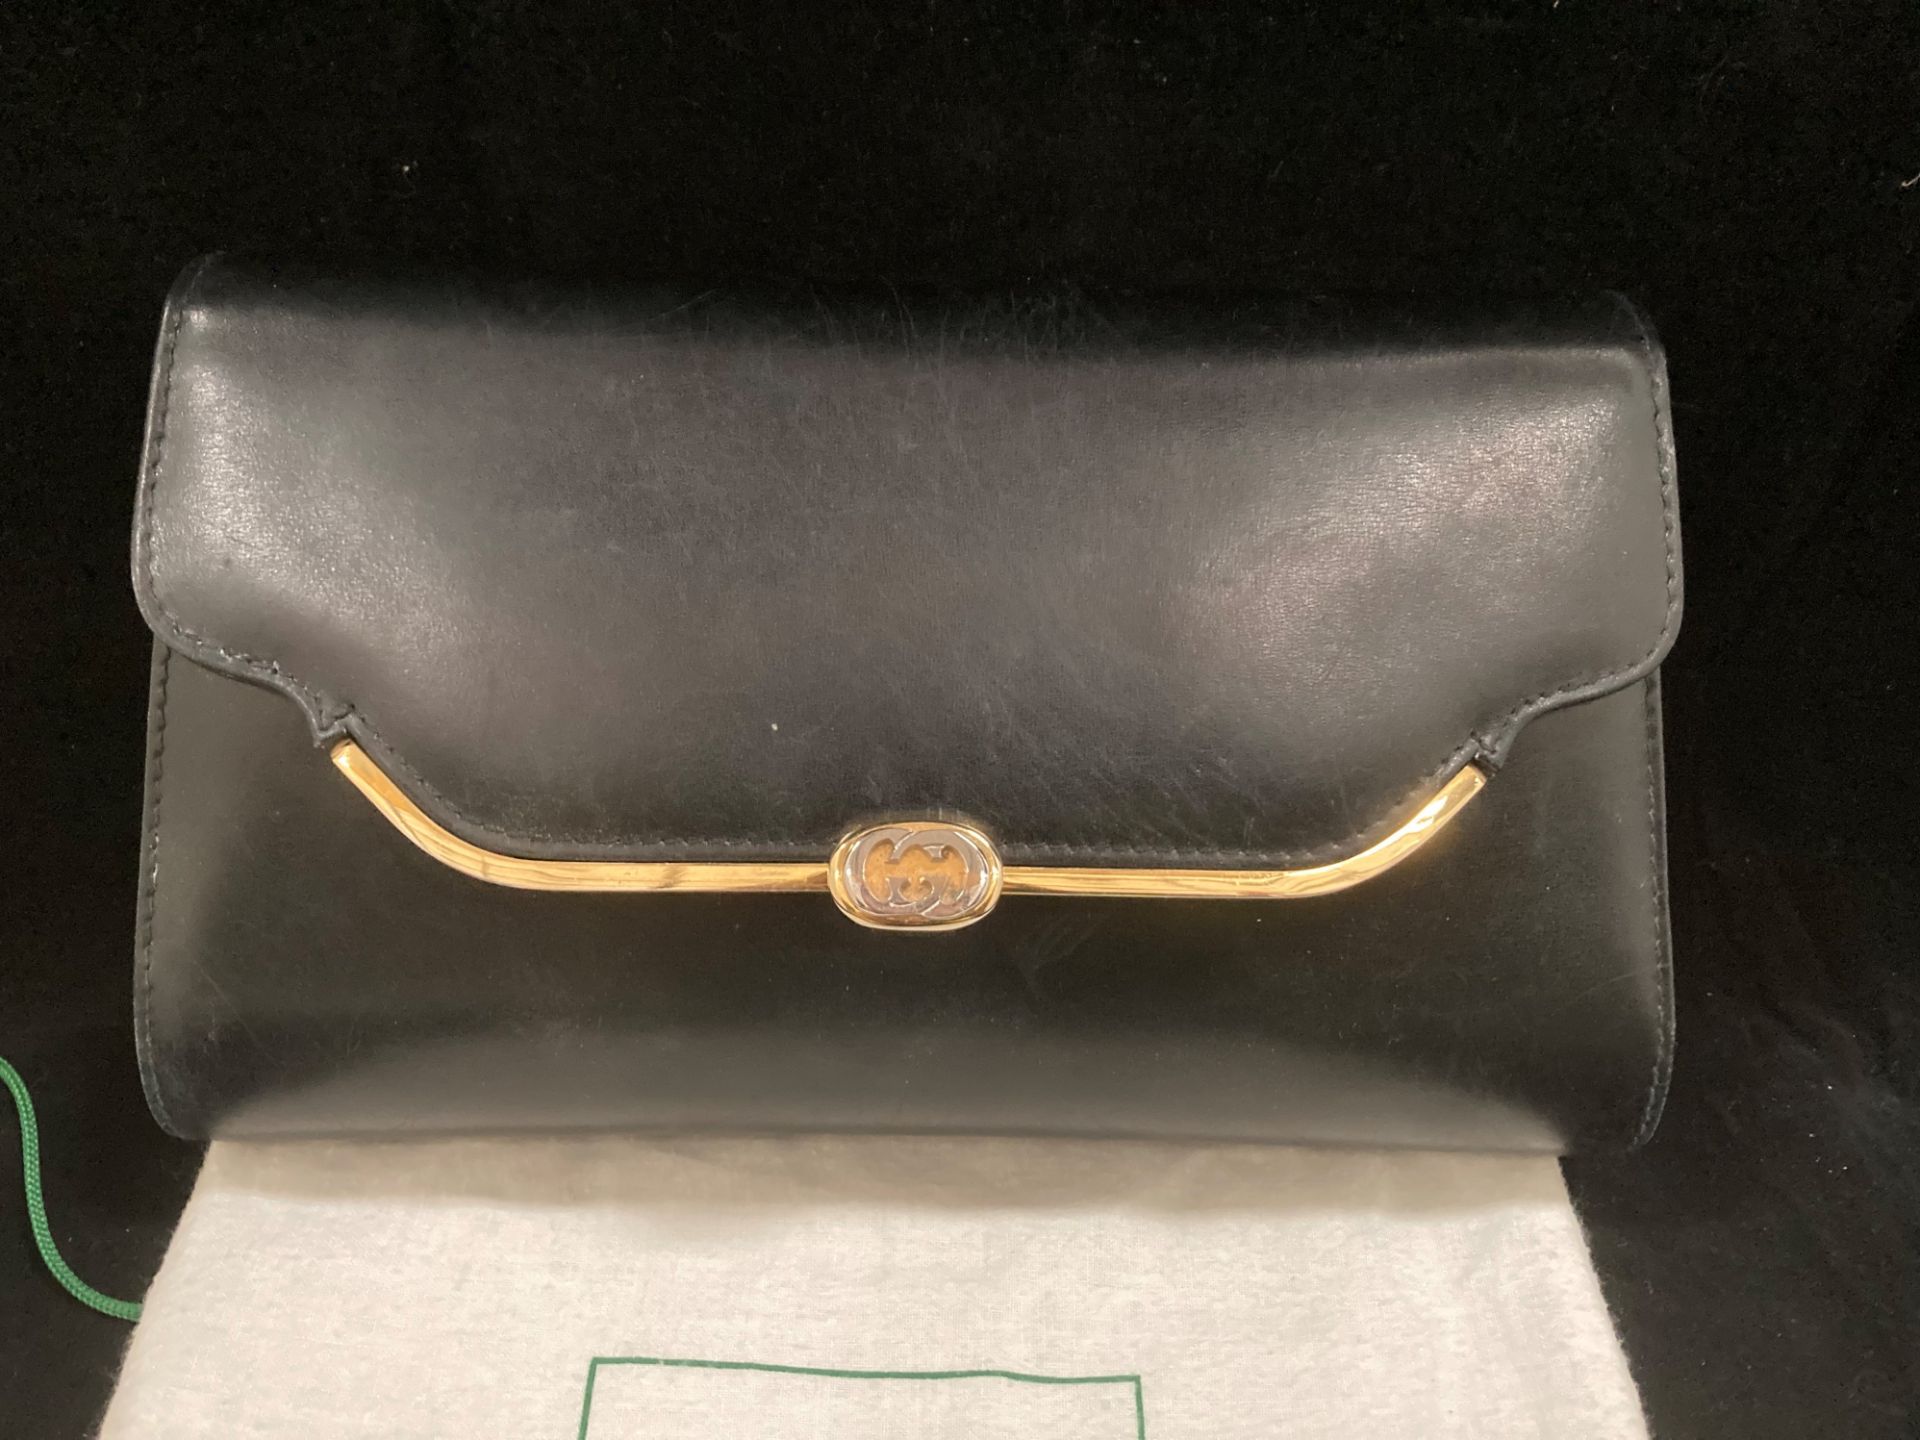 A Gucci black leather clutch bag including a long strap and protective bag. - Image 2 of 3